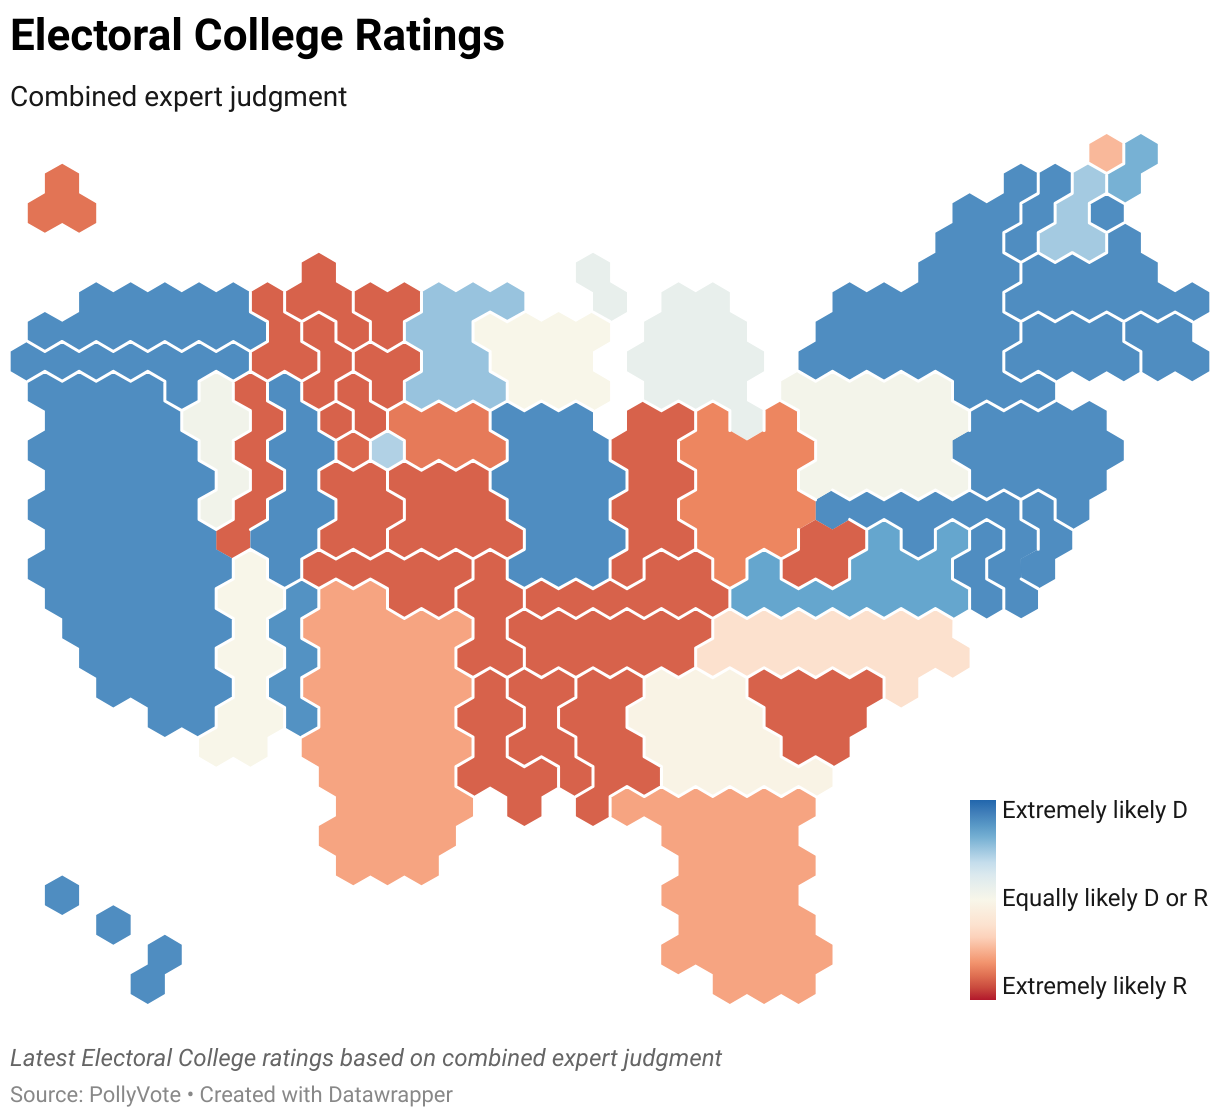 Latest Electoral College ratings based on combined expert judgment